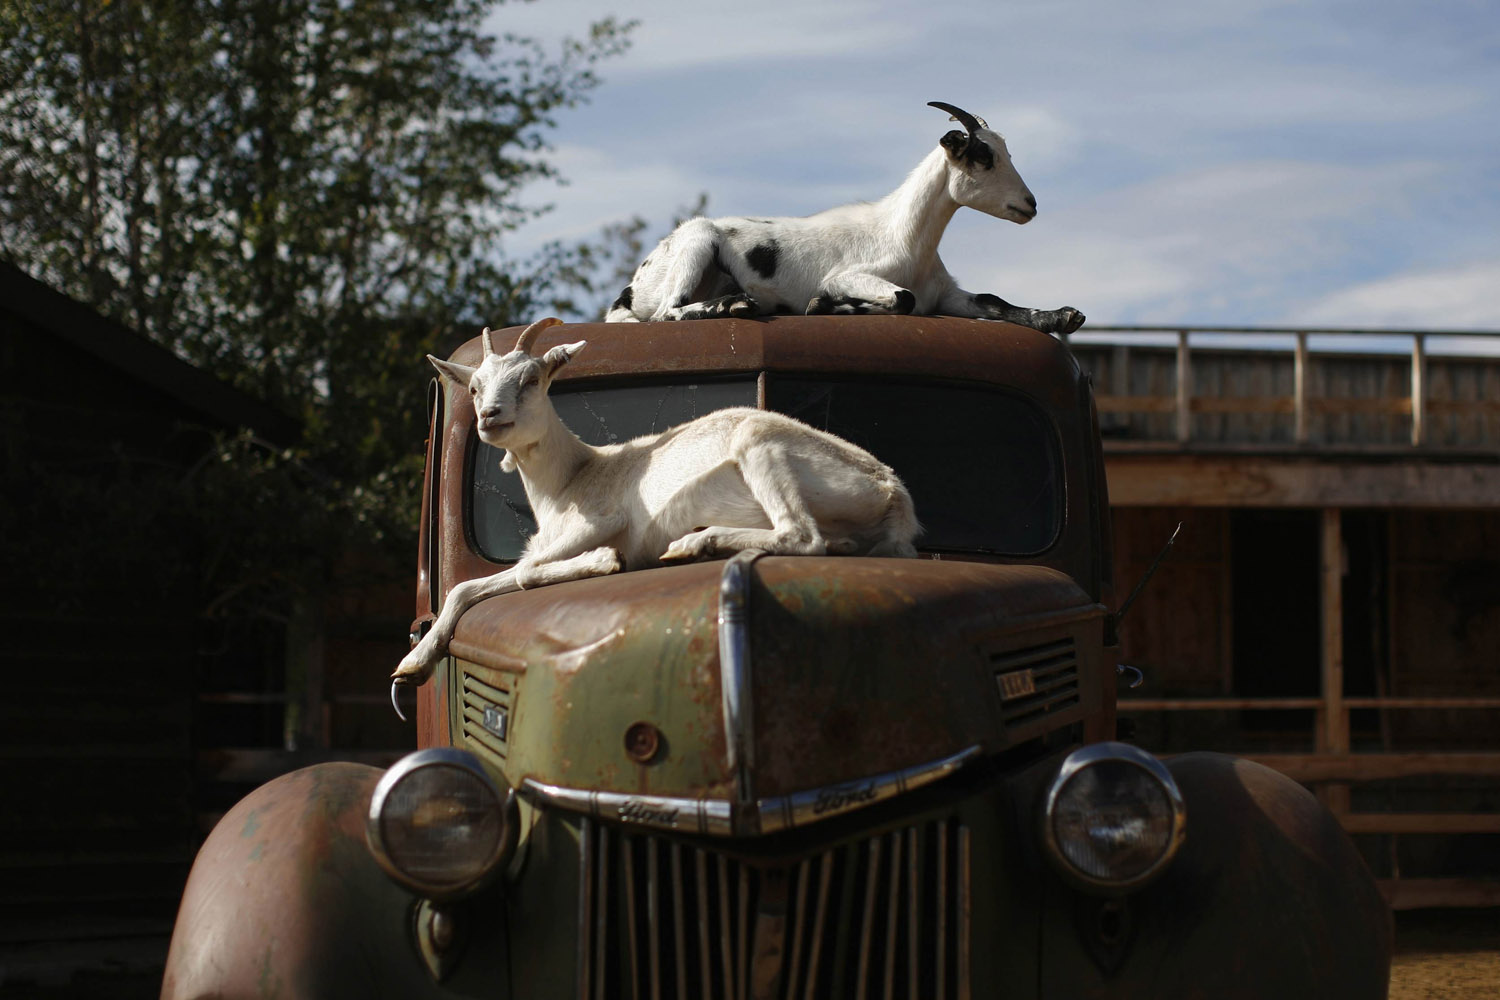 Aug. 20, 2012. Goats rest on a vintage truck at Caribou Crossing near Carcross in Yukon, Canada.